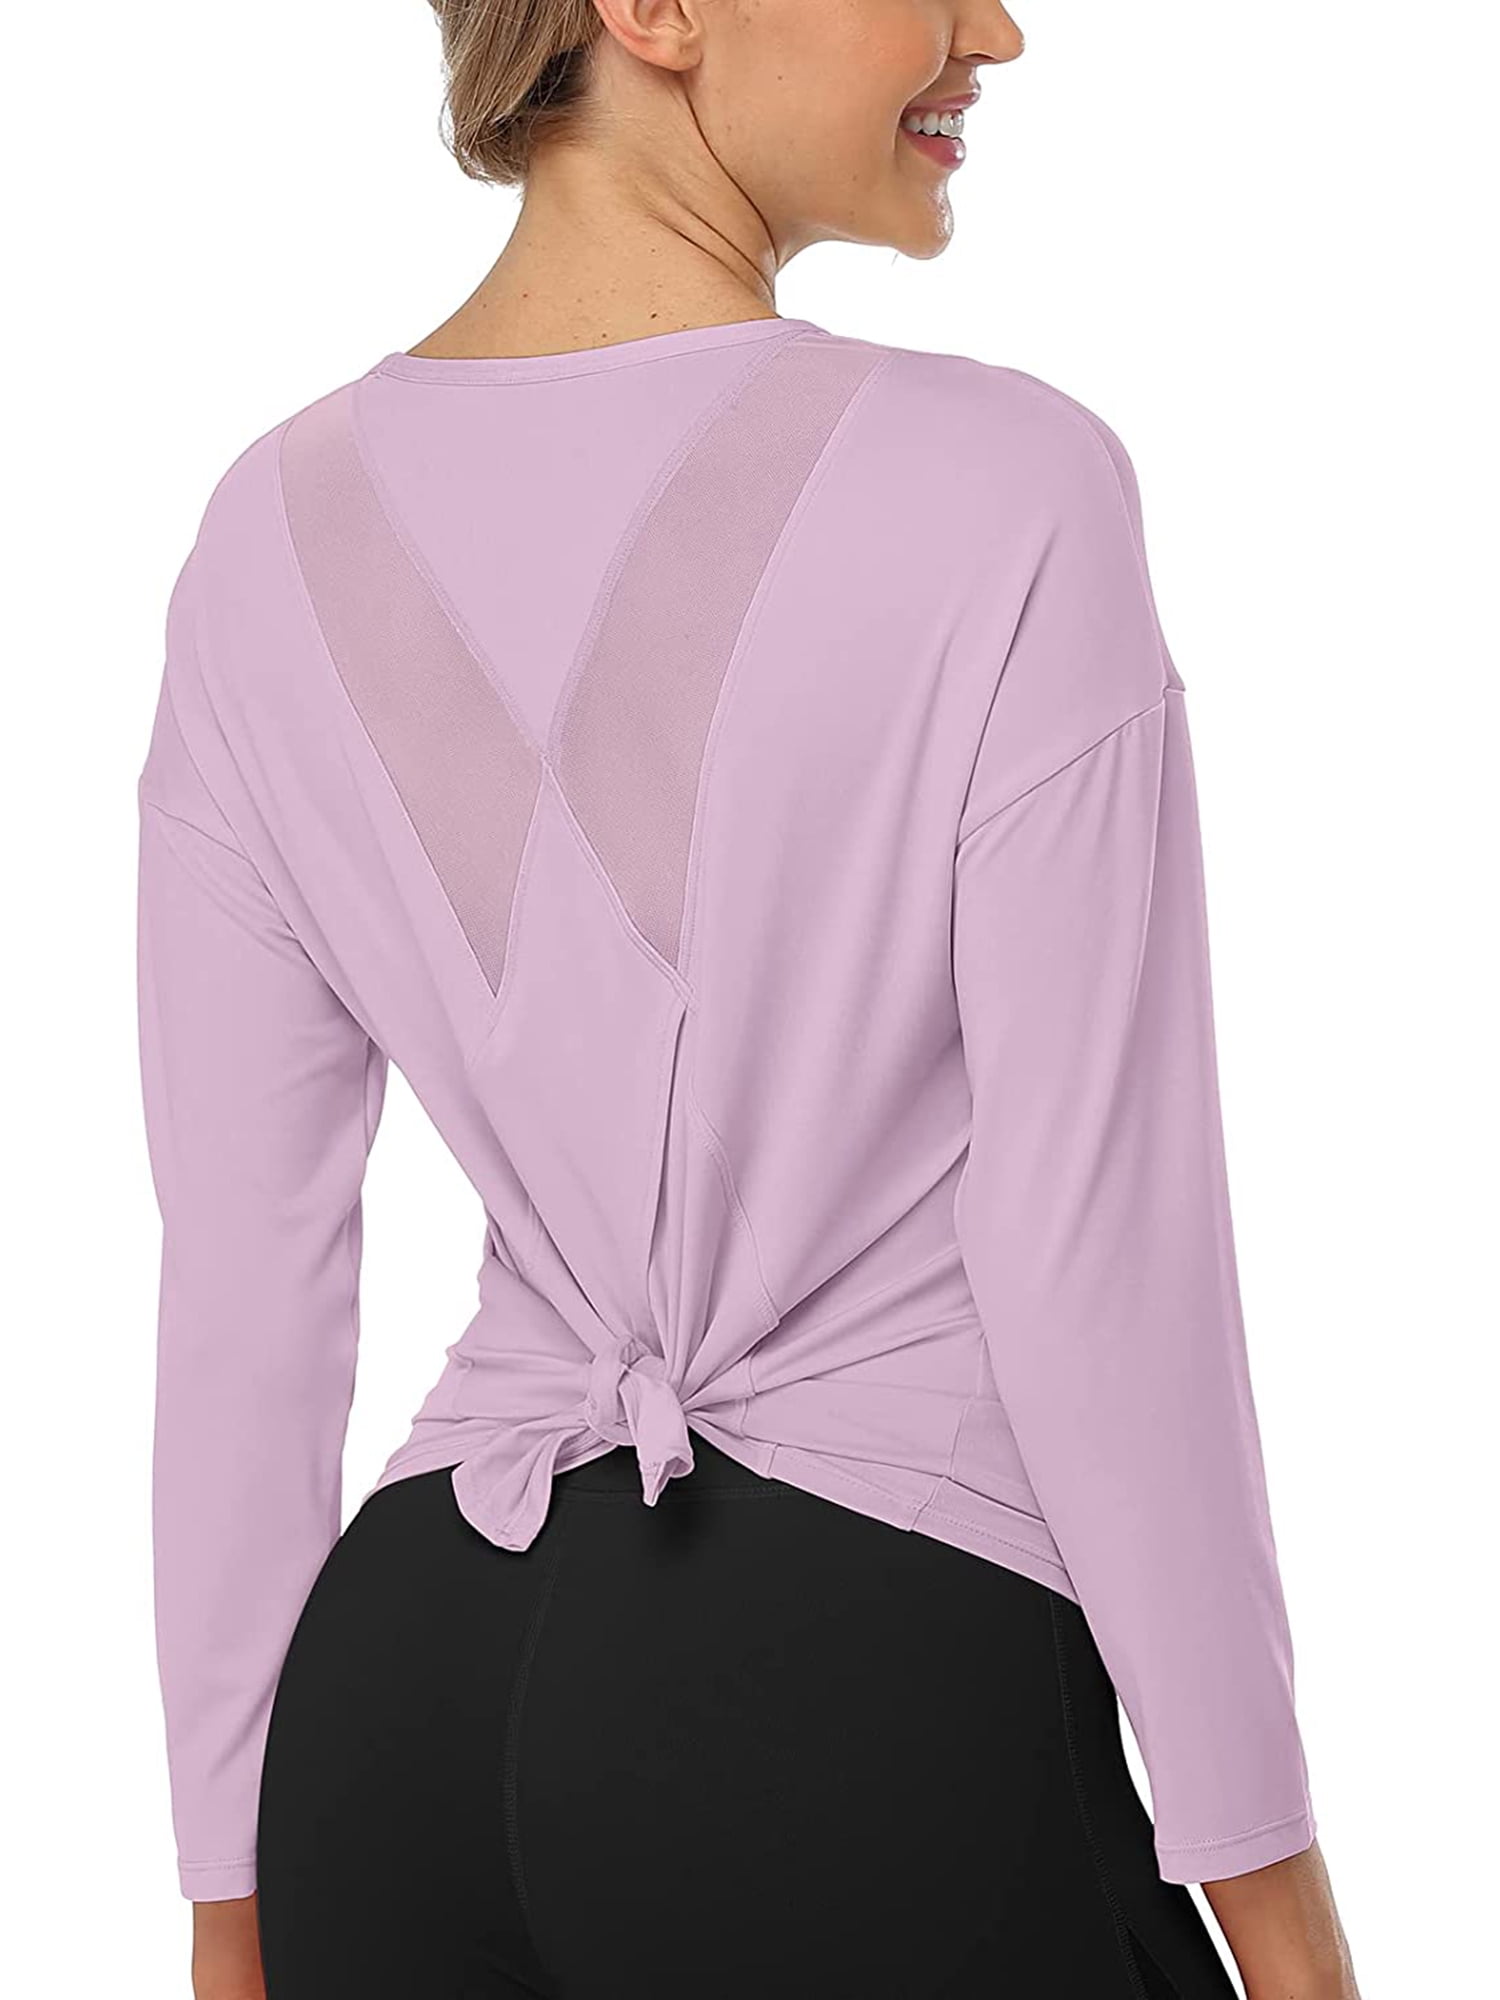 Long Sleeve Workout Shirts for Women Tie Back Breathable Sports Tops 